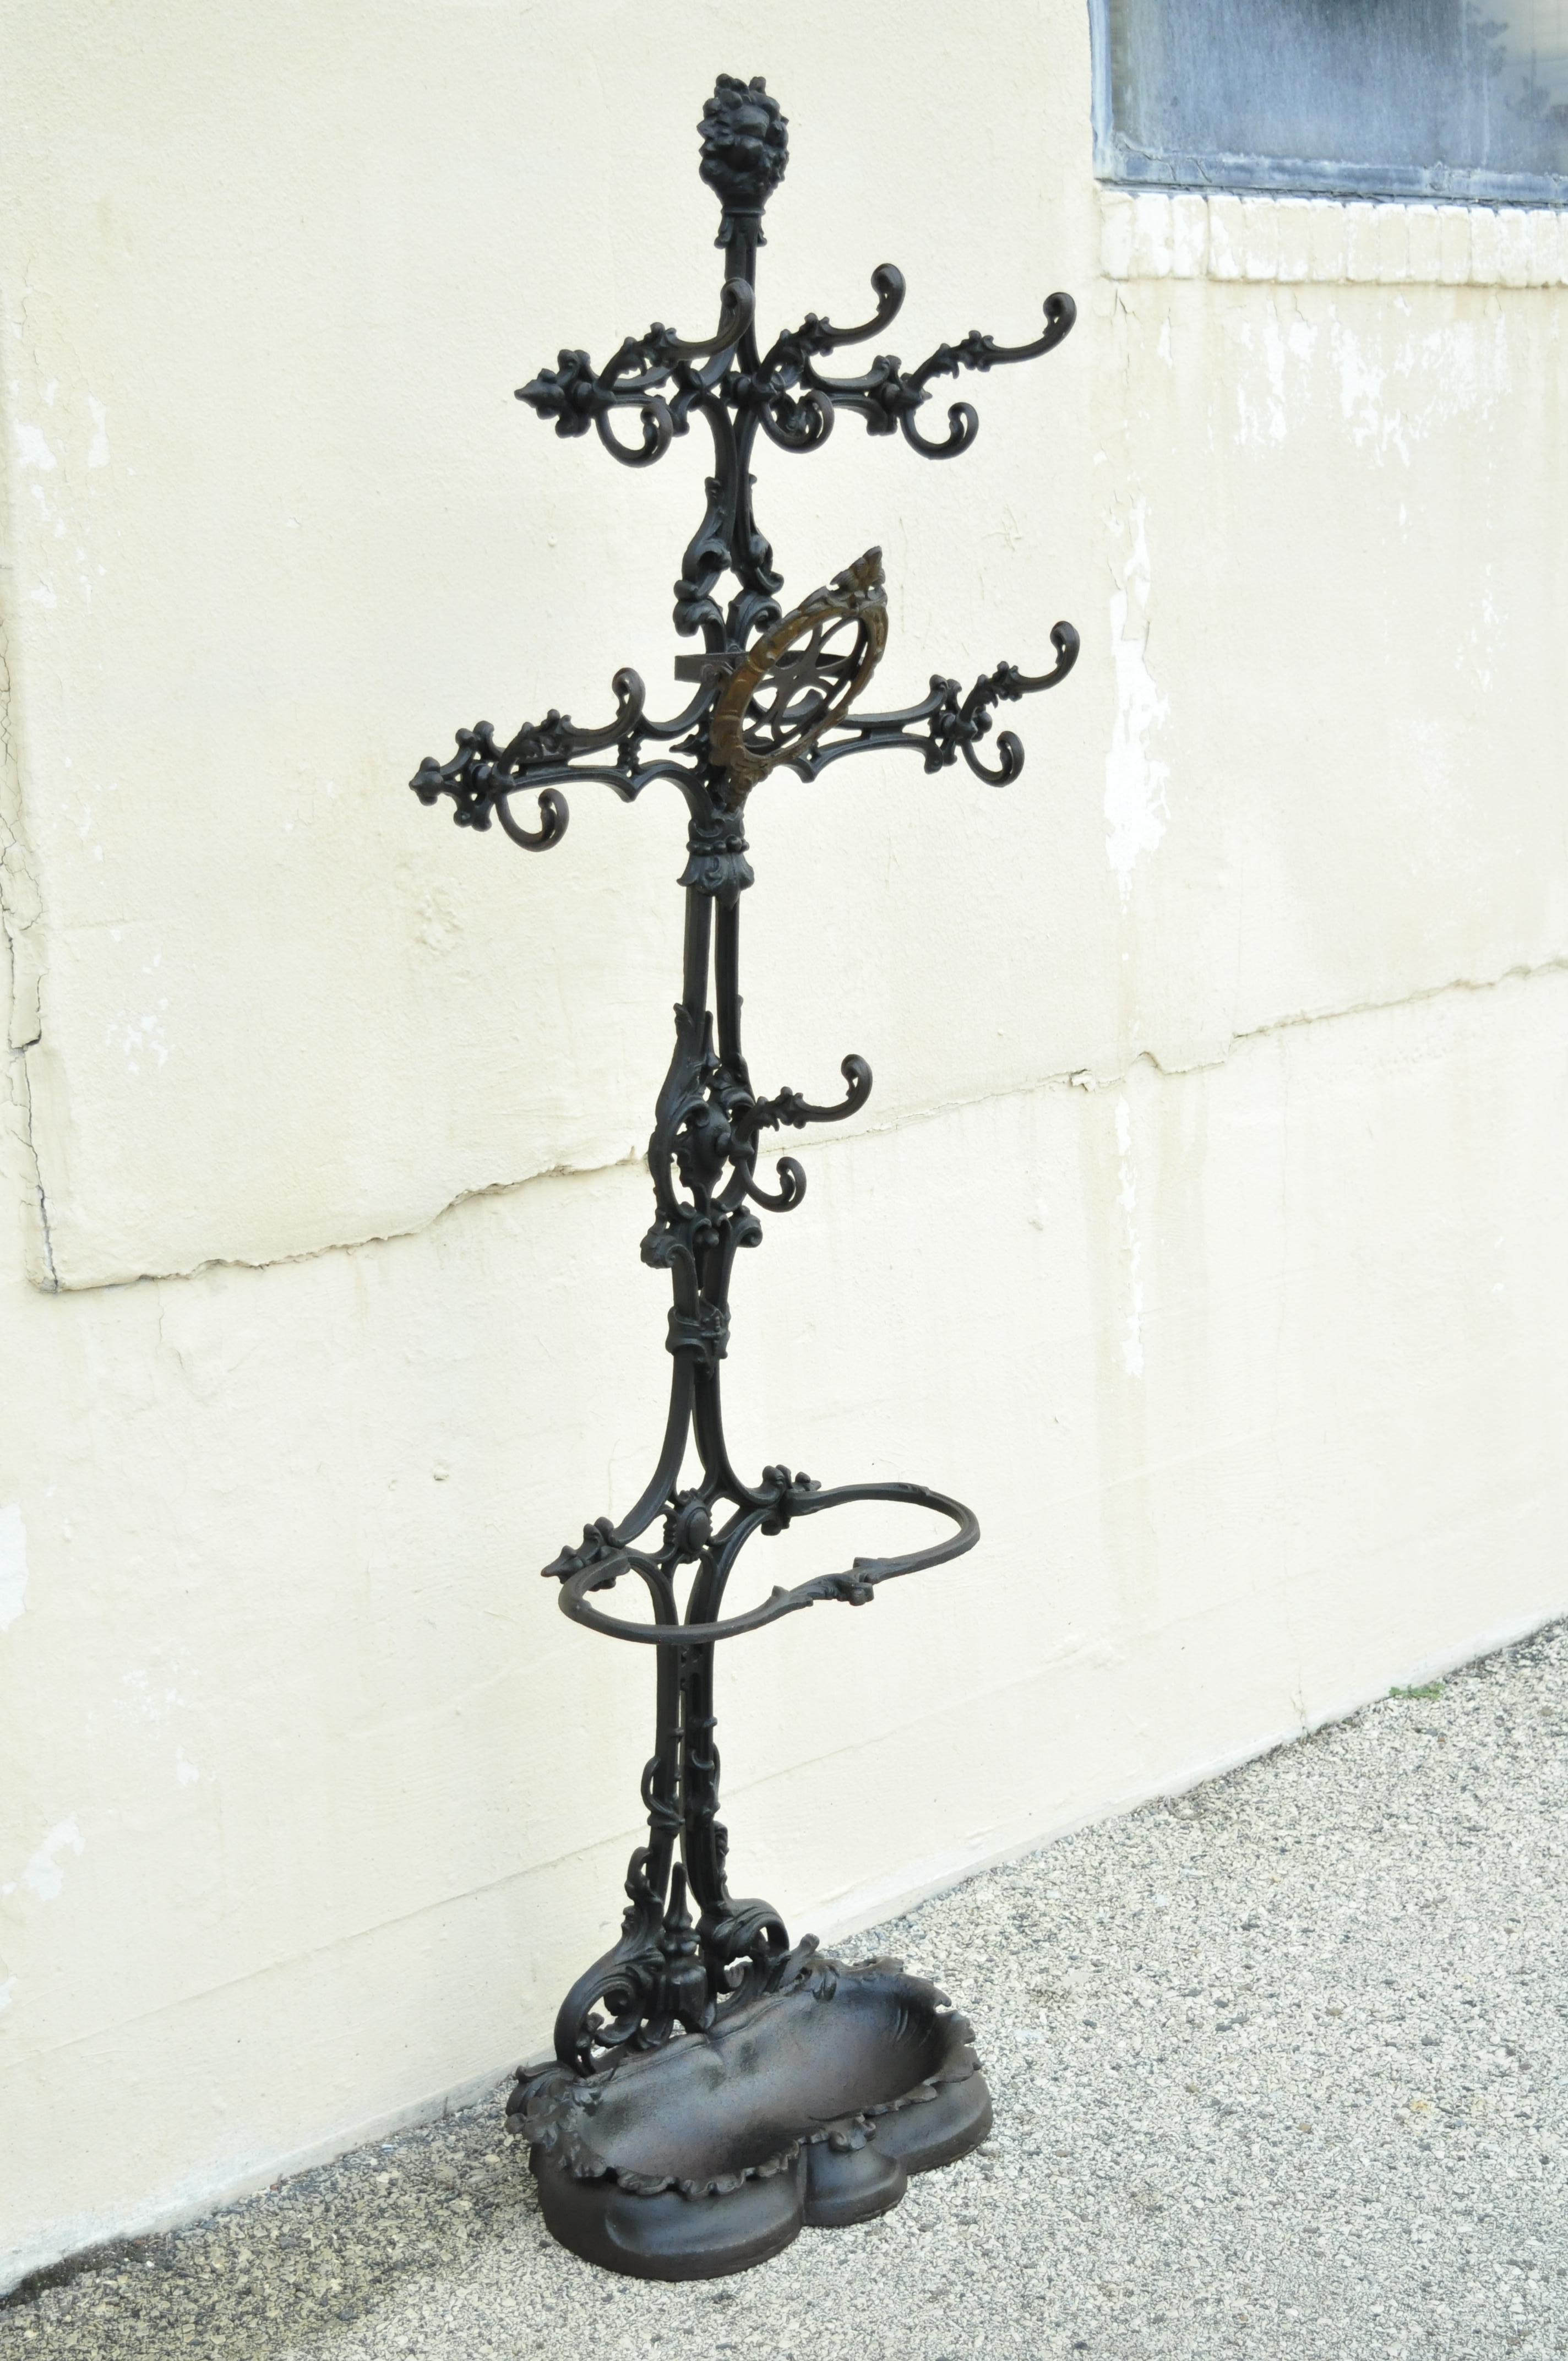 19th Century Antique Victorian cast iron rococo hall tree coat hook umbrella stand. Item features multiple ornate hooks, removable cast iron drip pan, frame for central mirror (glass missing, cast iron construction, very nice antique item, quality